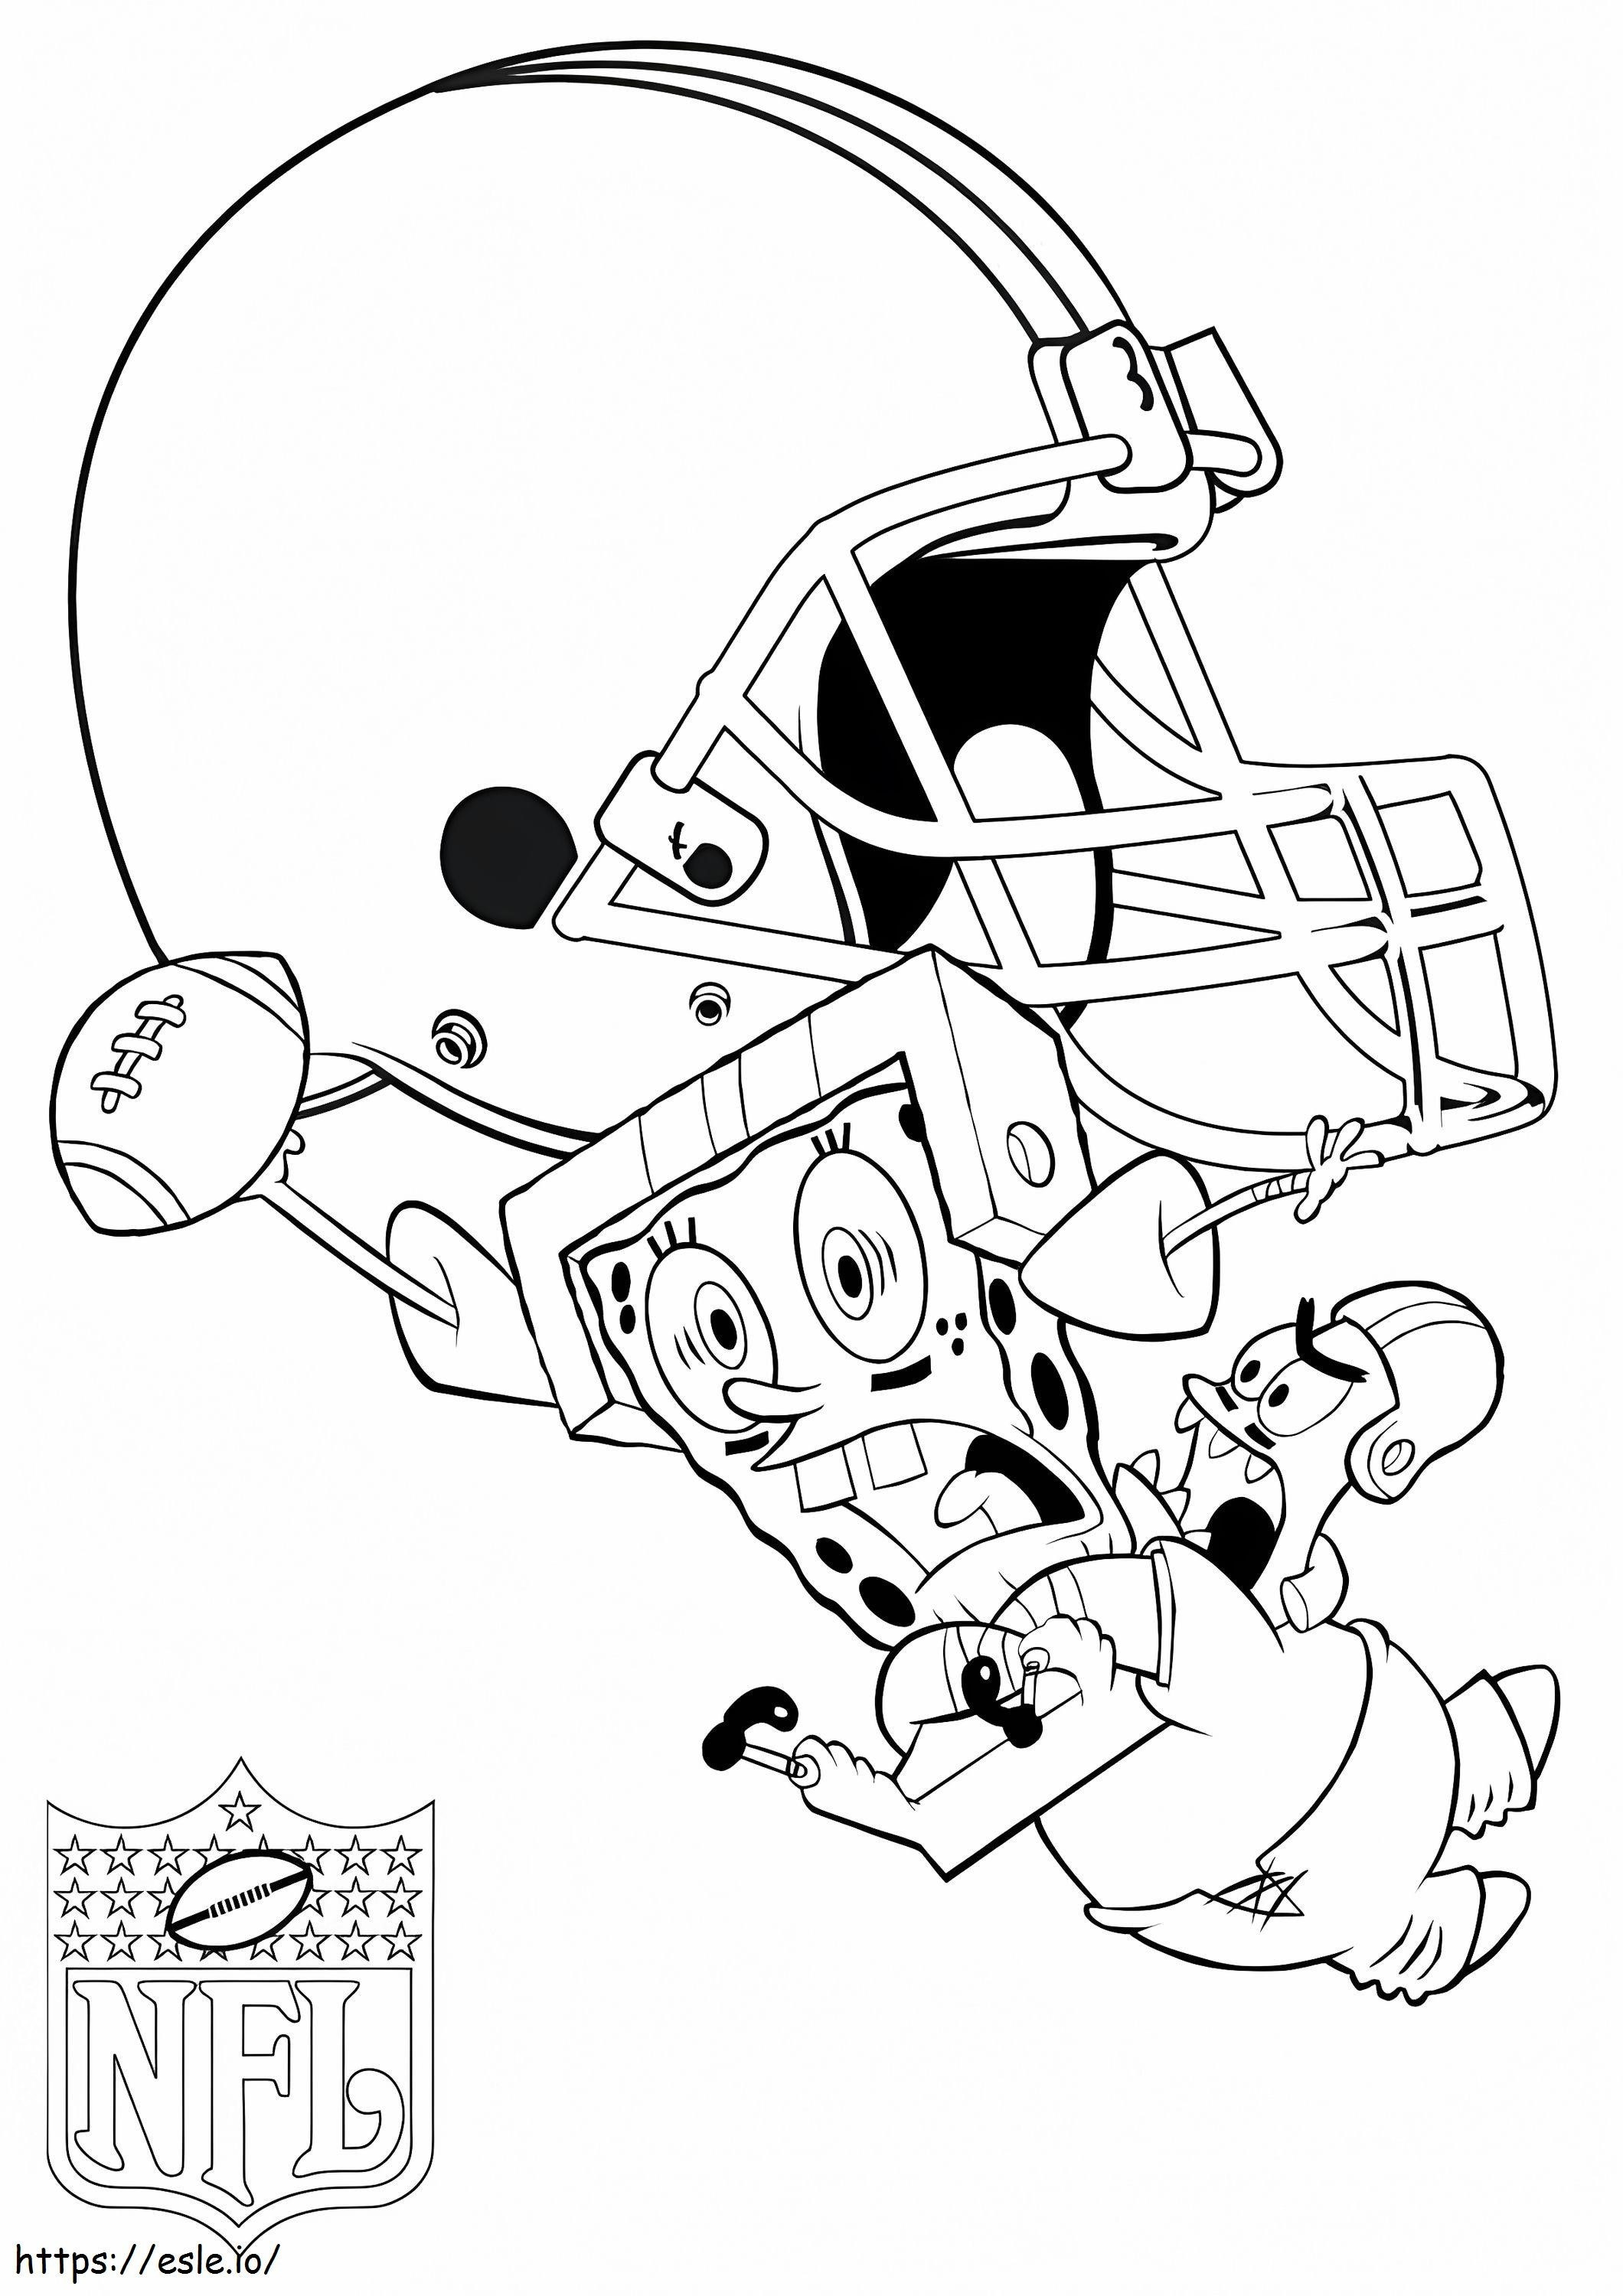 Spongebob Cleveland Browns coloring page